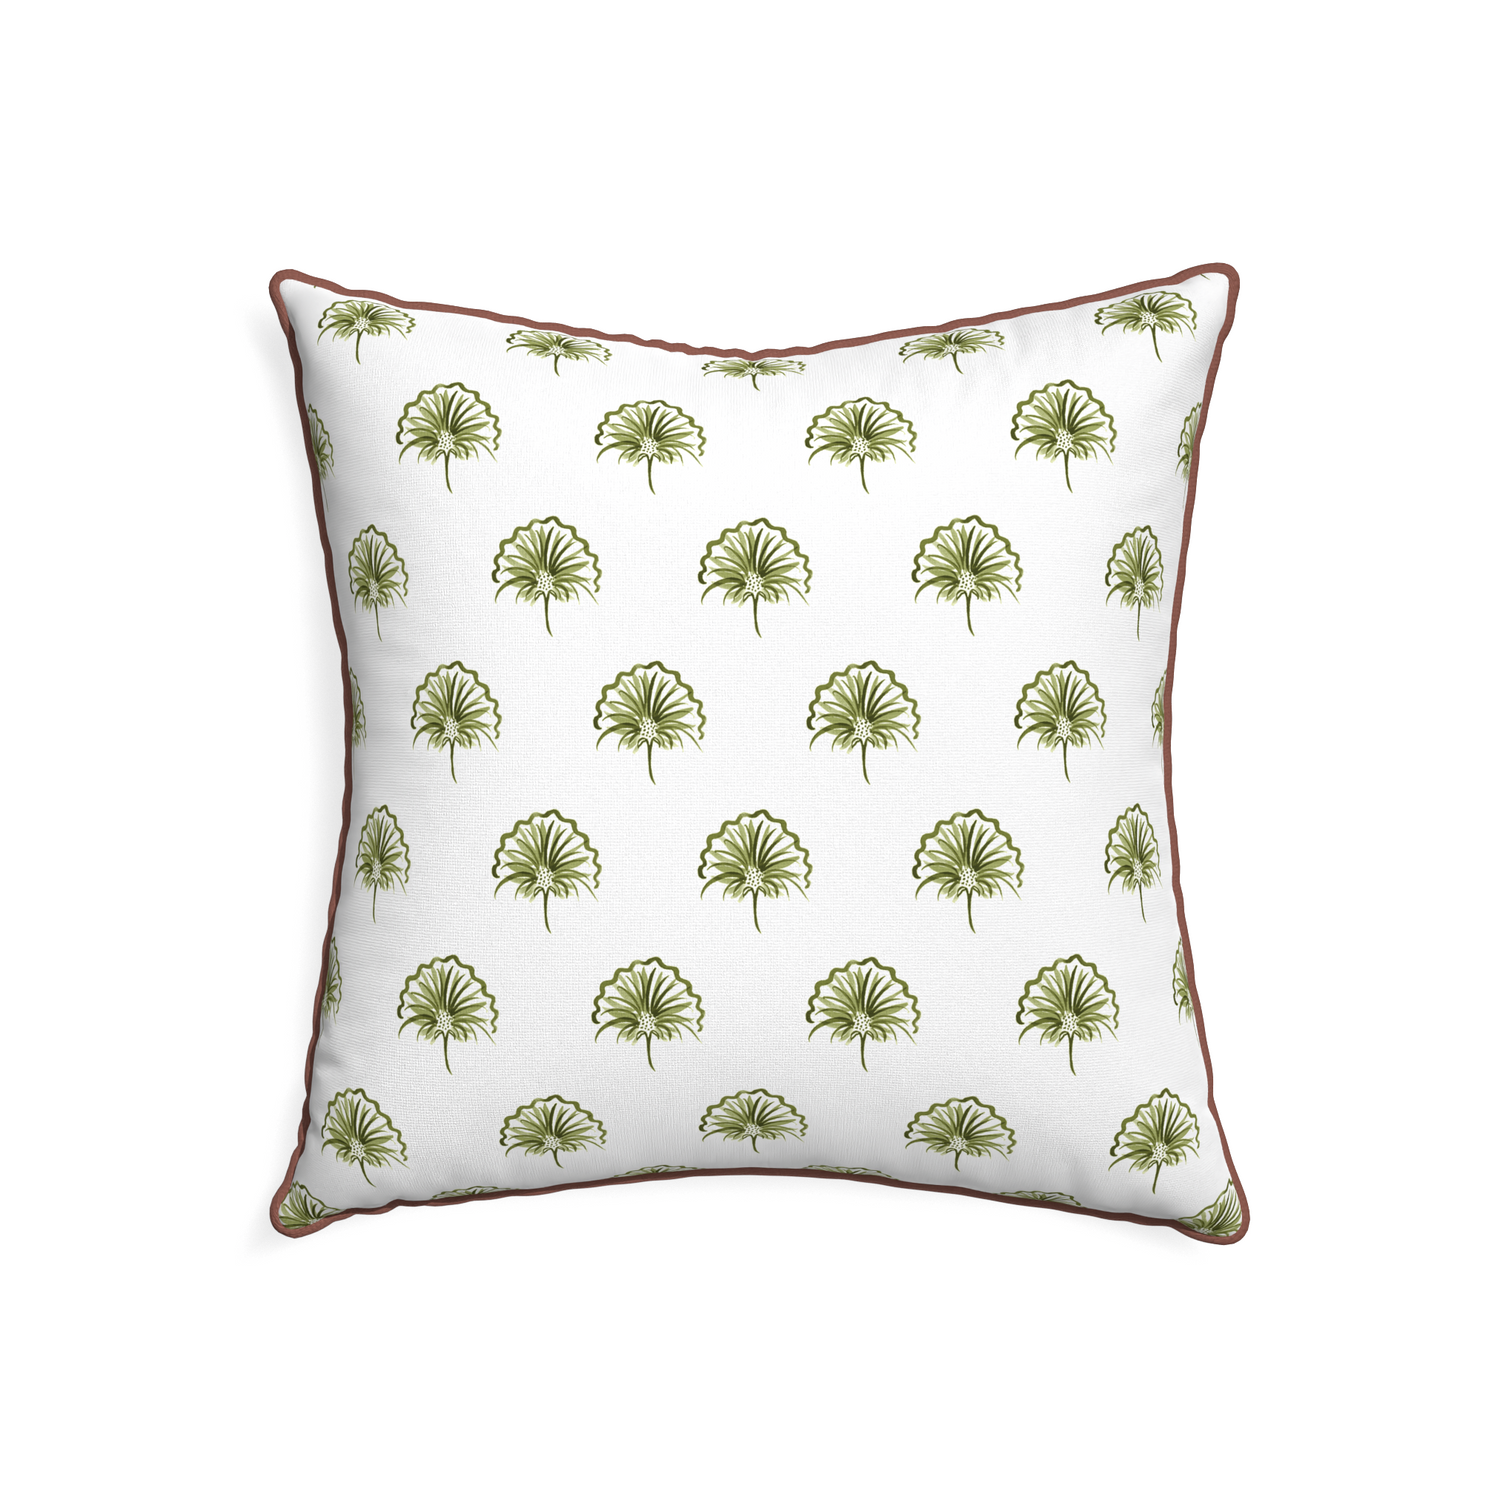 22-square penelope moss custom green floralpillow with w piping on white background